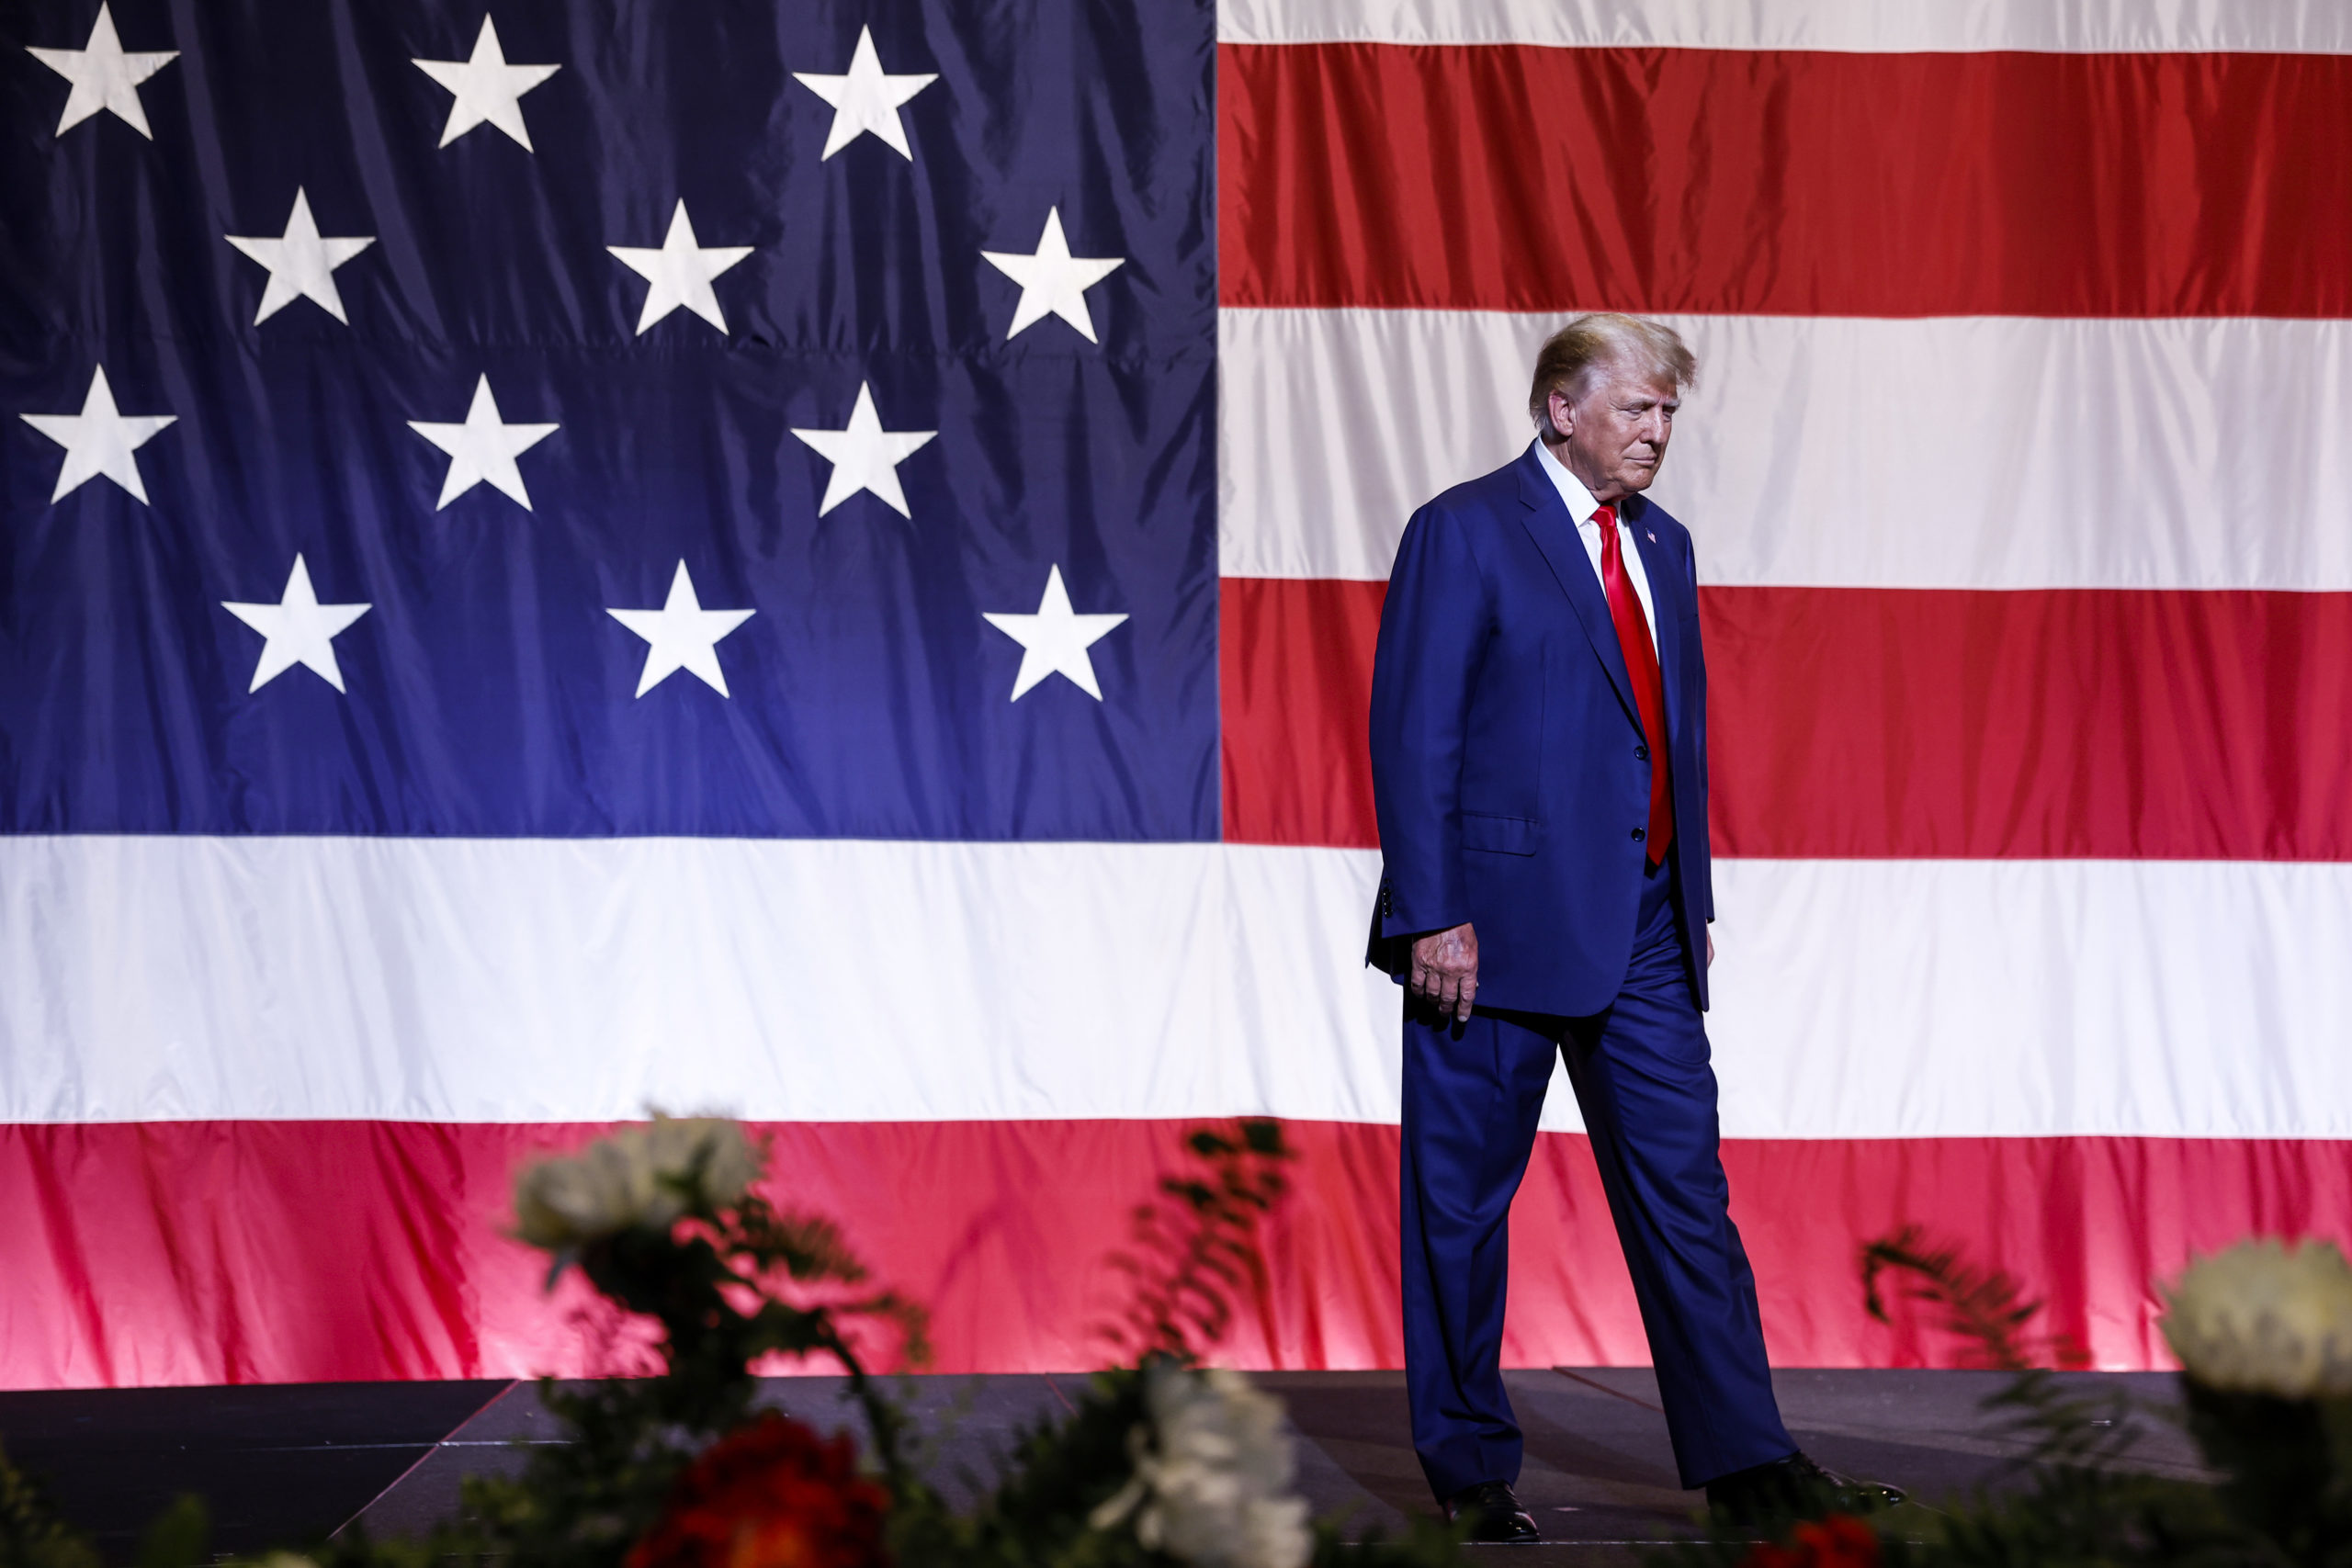  Former U.S. President Donald Trump arrives to deliver remarks to the Georgia state GOP convention at the Columbus Convention and Trade Center on June 10, 2023 in Columbus, Georgia. On Friday, former President Trump was indicted by a federal grand jury on 37 felony counts in Special Counsel Jack Smith’s classified documents probe. (Photo by Anna Moneymaker/Getty Images)